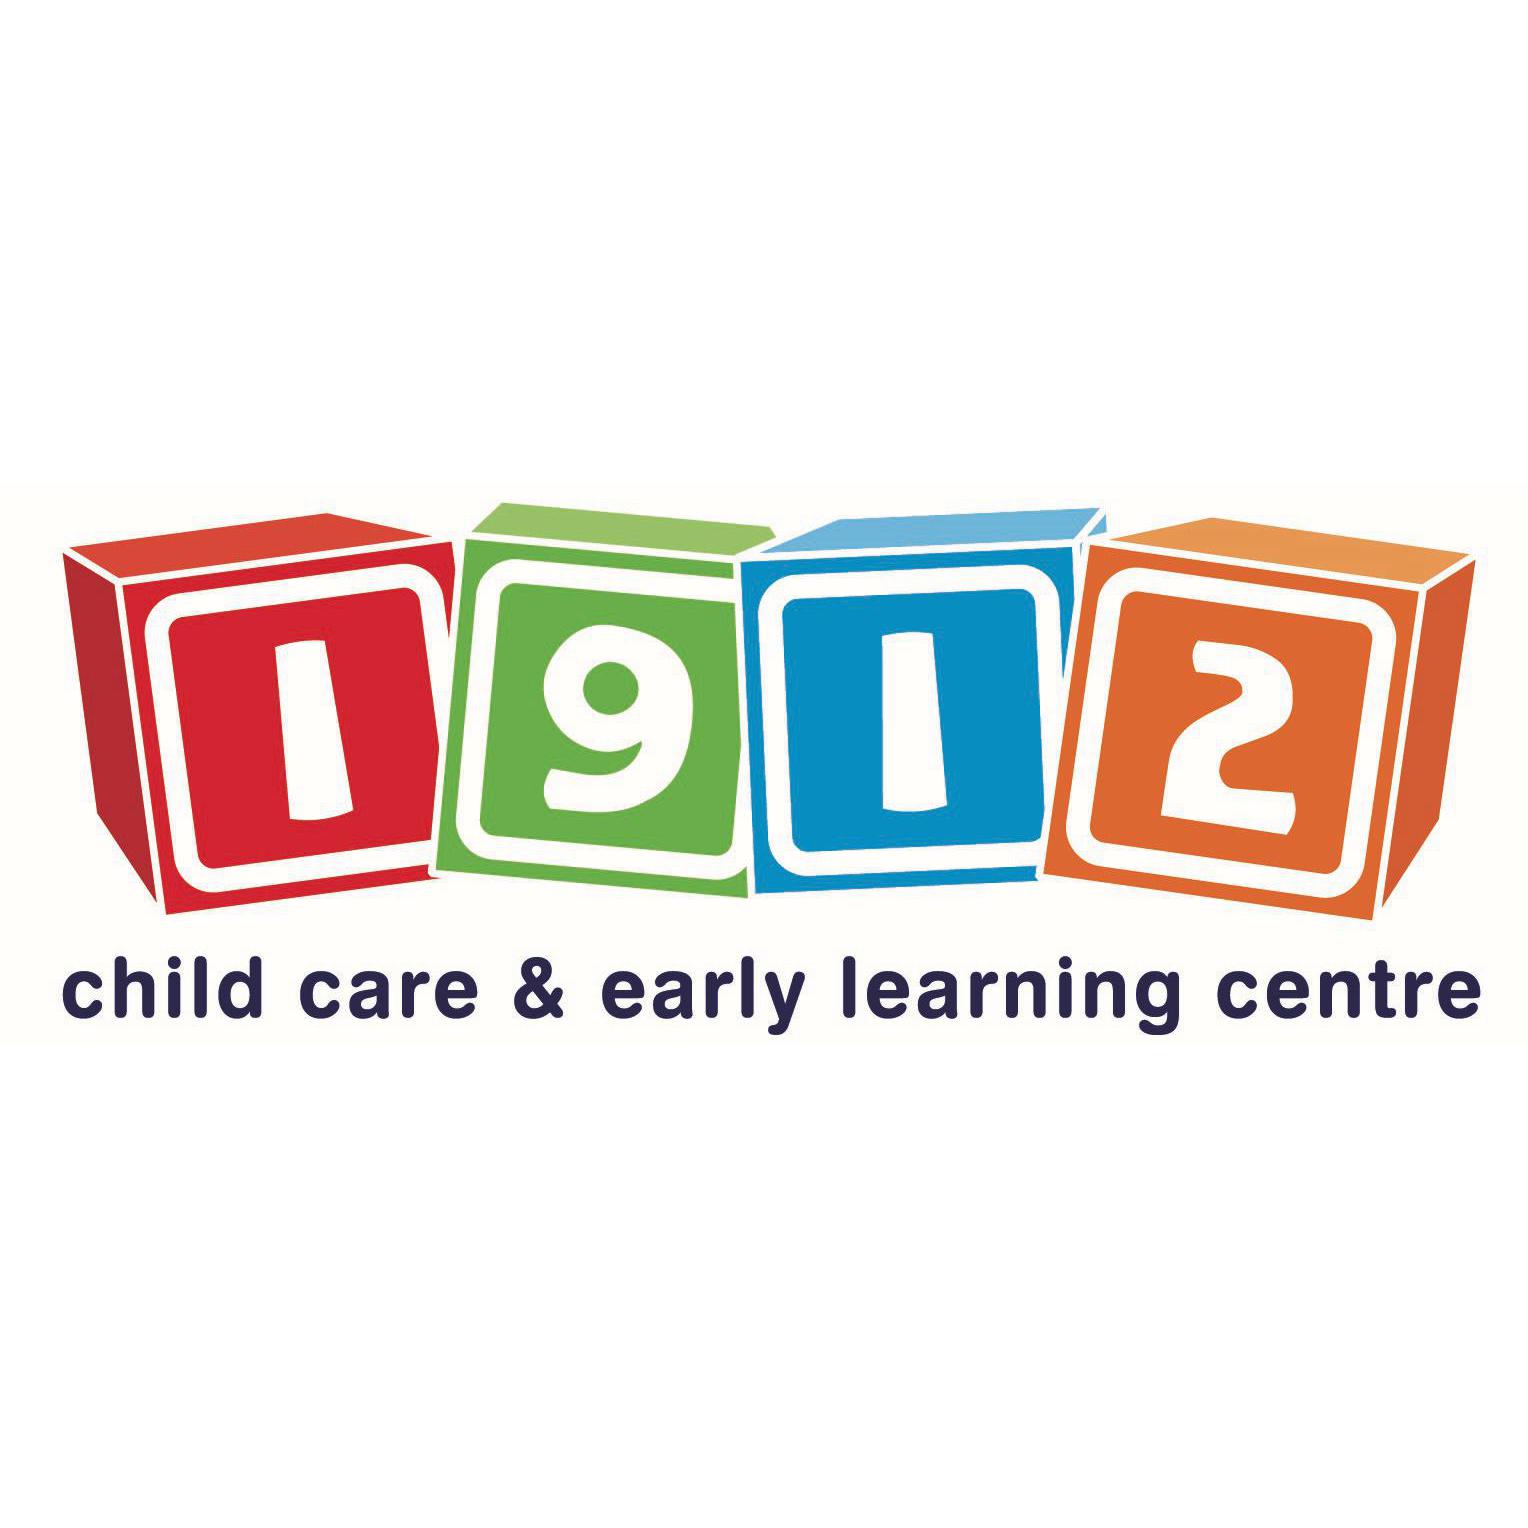 1912 Child Care Centre & Early Learning Centre - Devonport, TAS 7310 - (03) 6423 3885 | ShowMeLocal.com